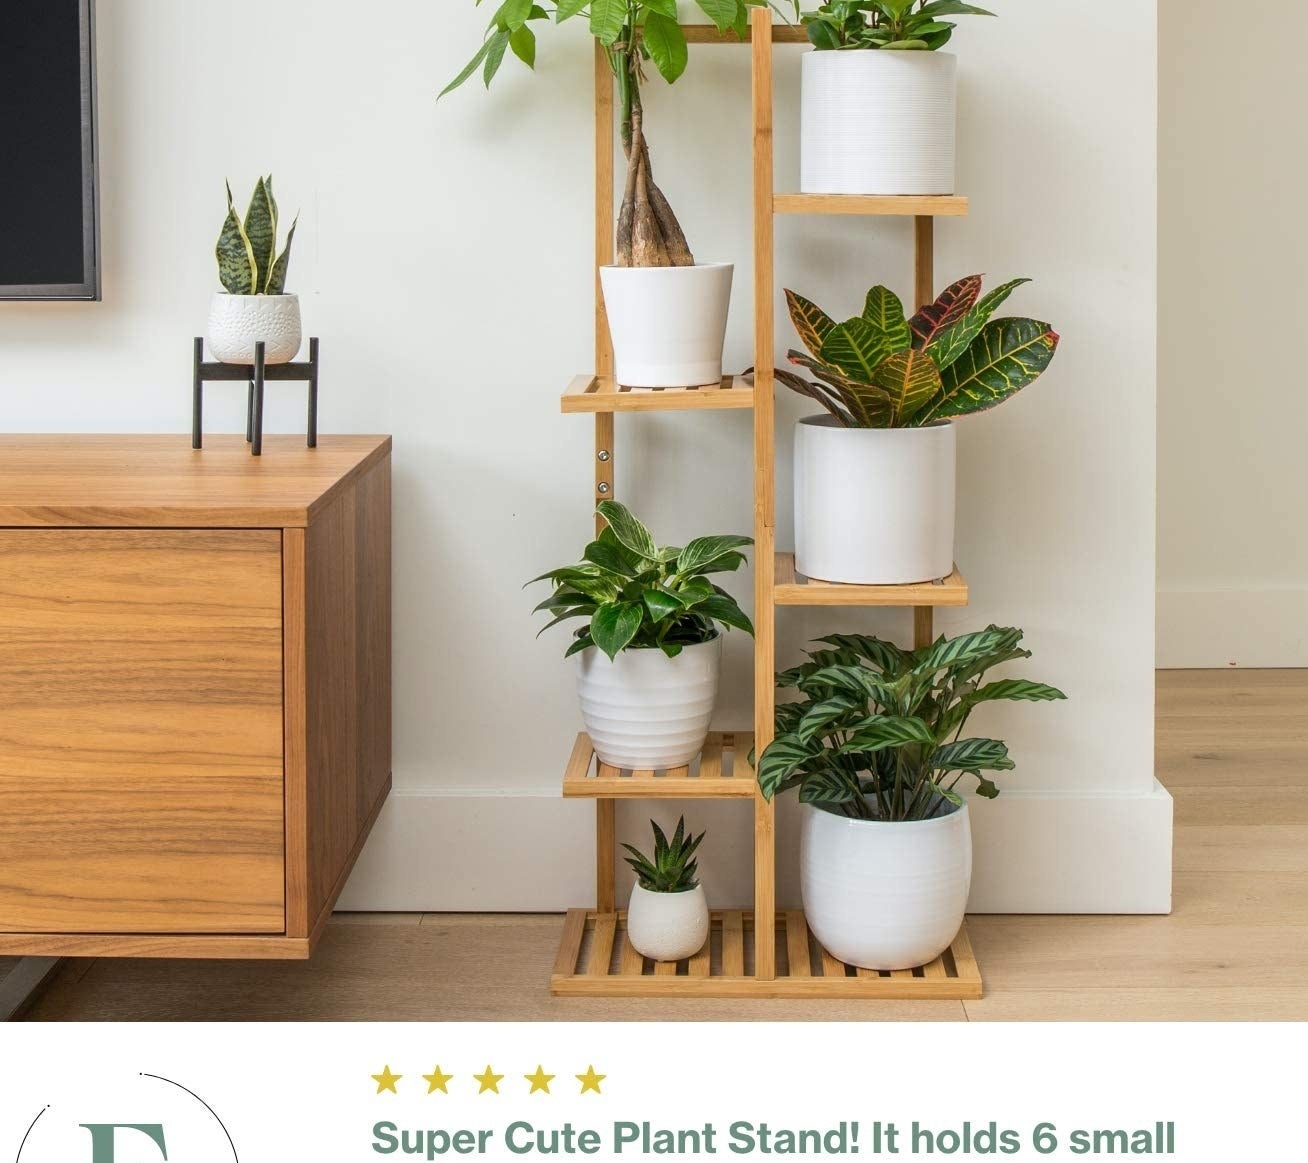 Several plants in pots on the shelf